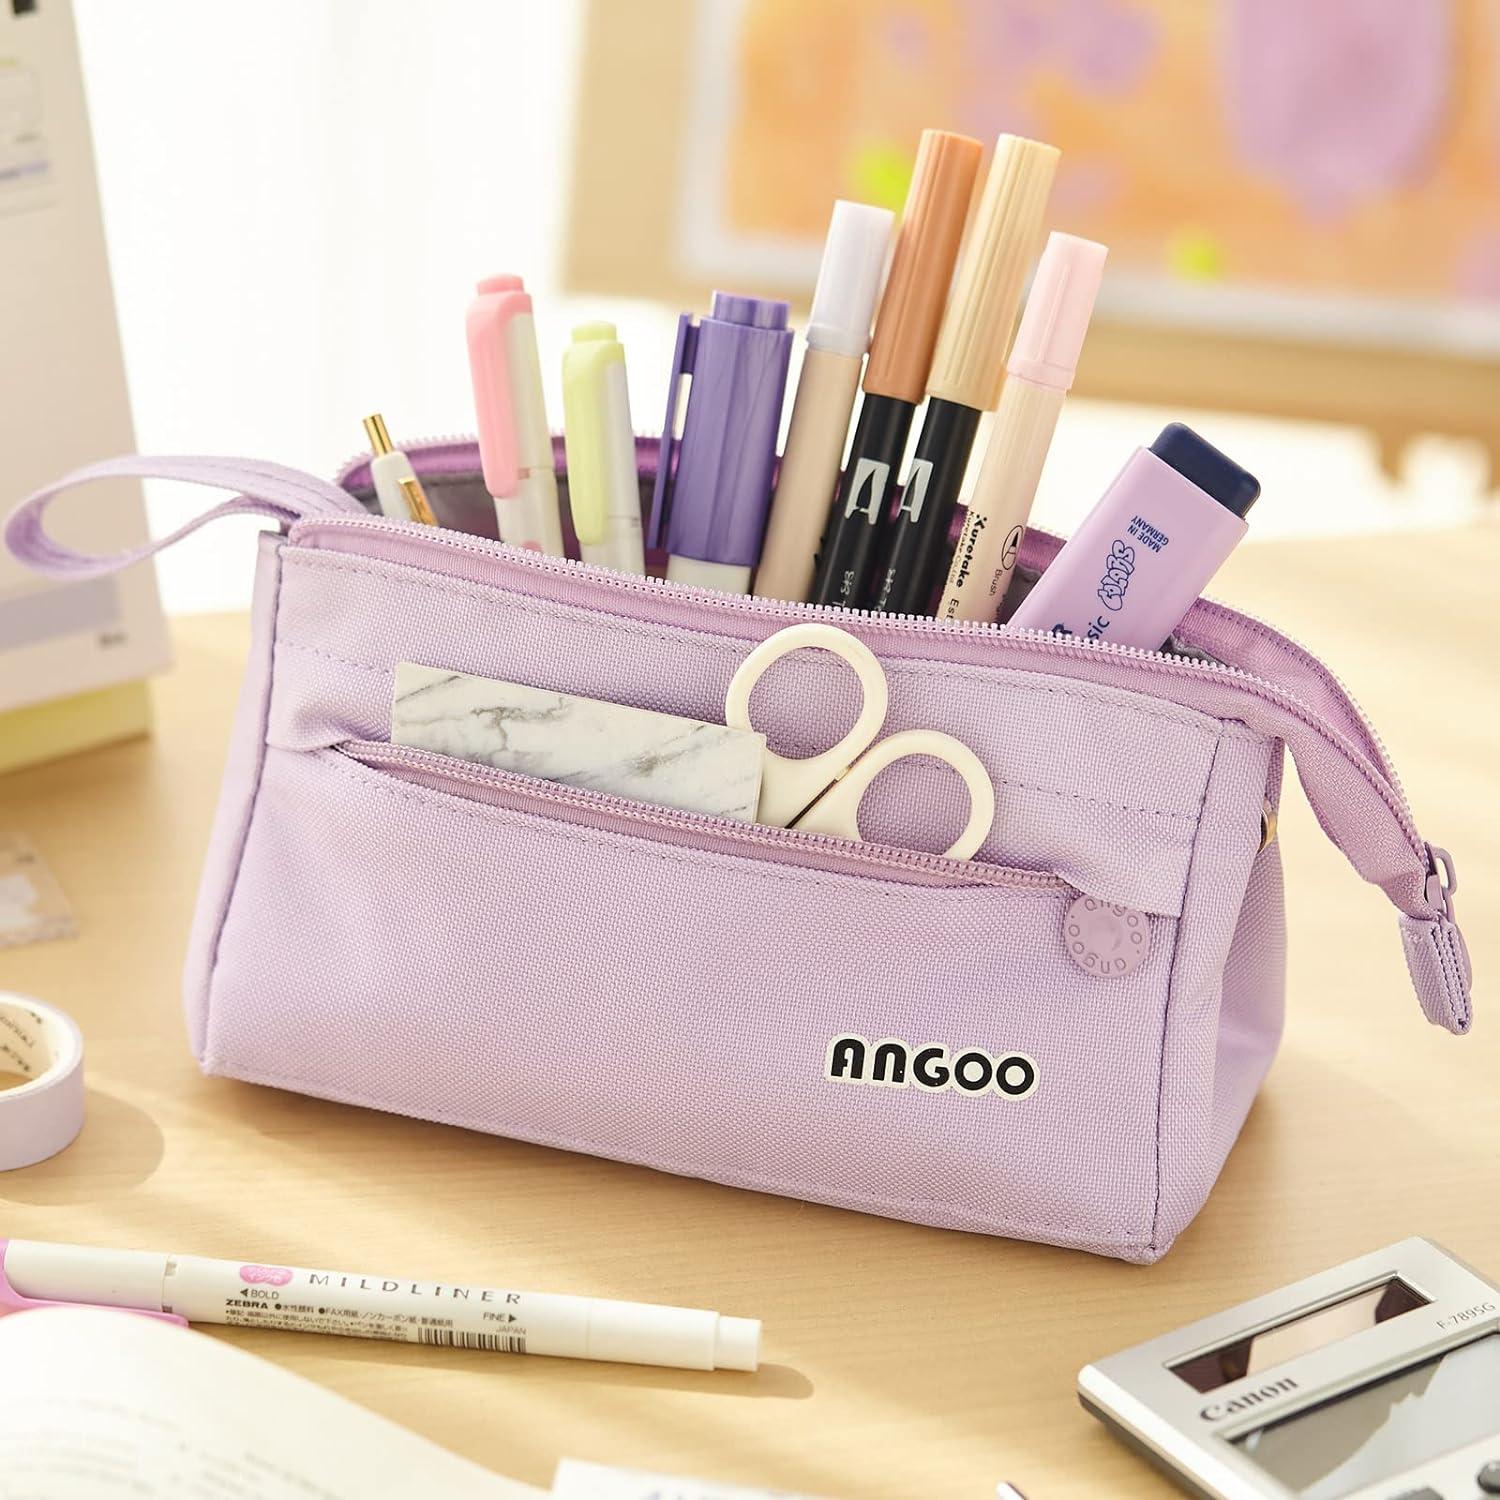 ANGOOBABY Large Capacity Pencil Case Durable Pen Pouch Portable Pencil Bag  with Handle for School Teen Girl Boy Men Women Adults purple